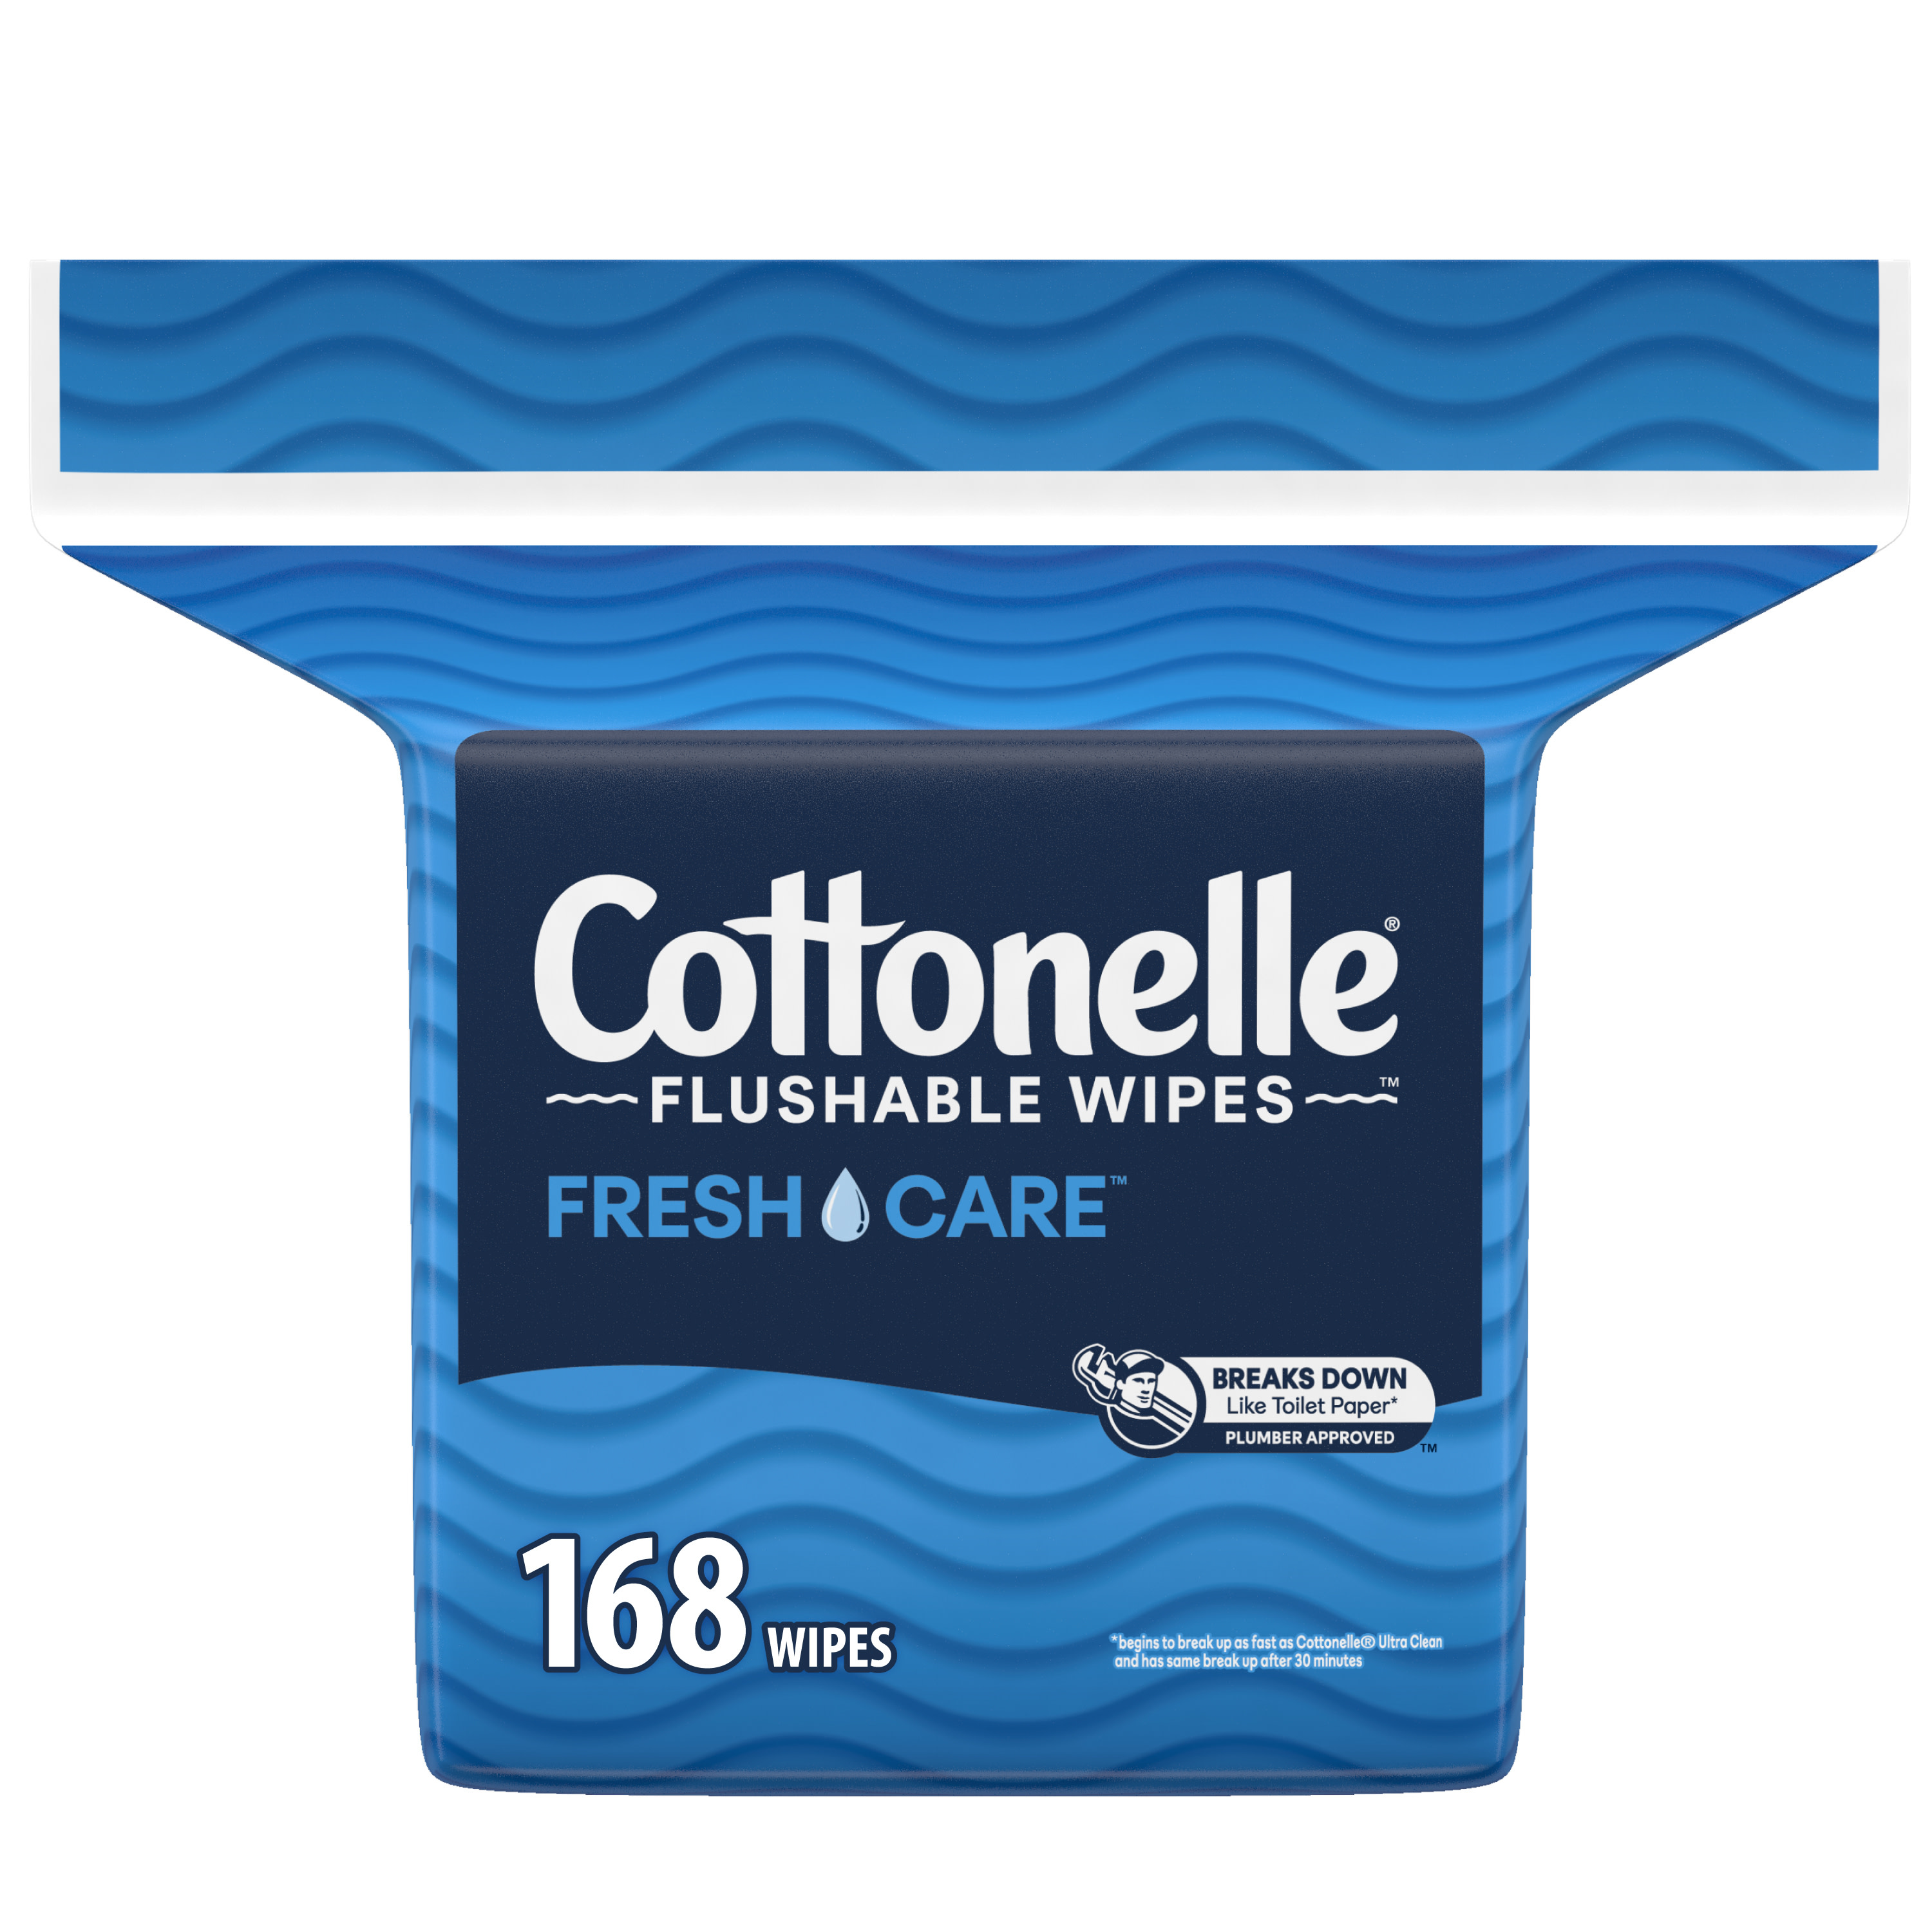 Cottonelle Fresh Care Flushable Wipes, 1 Resealable Bag - image 1 of 9